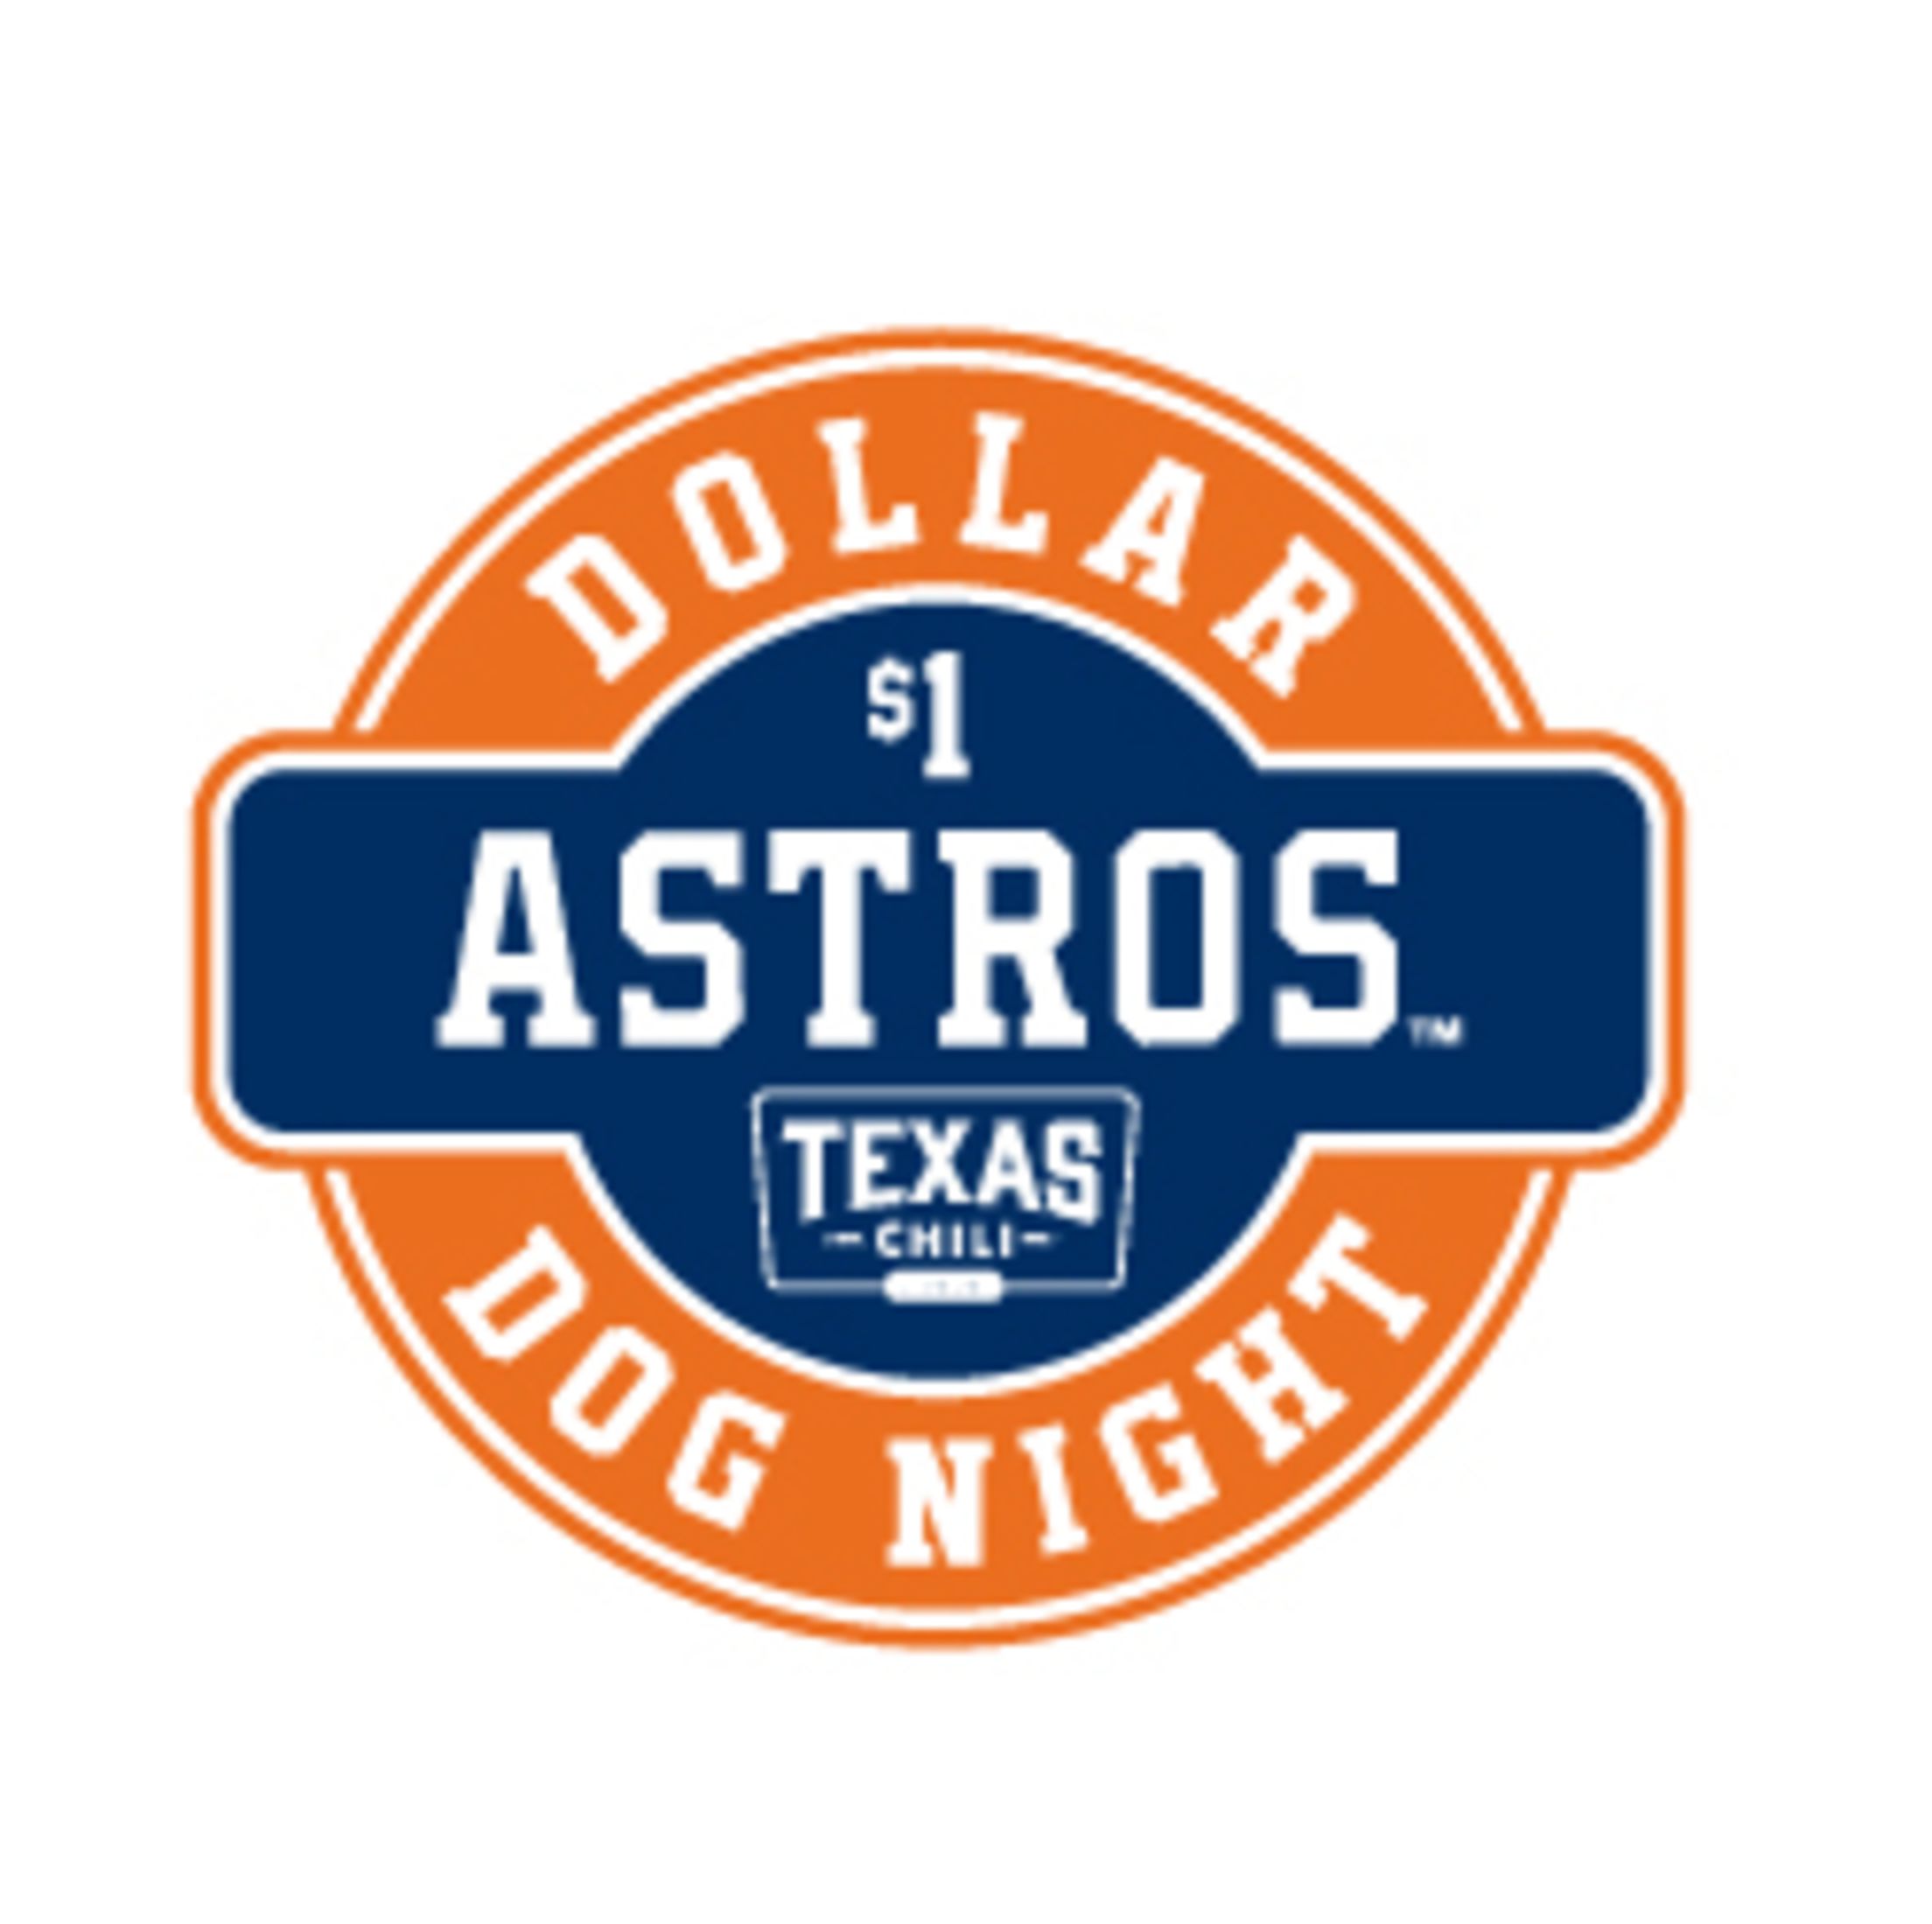 Minute Maid Park goes to the dogs for Astros' game - ABC13 Houston